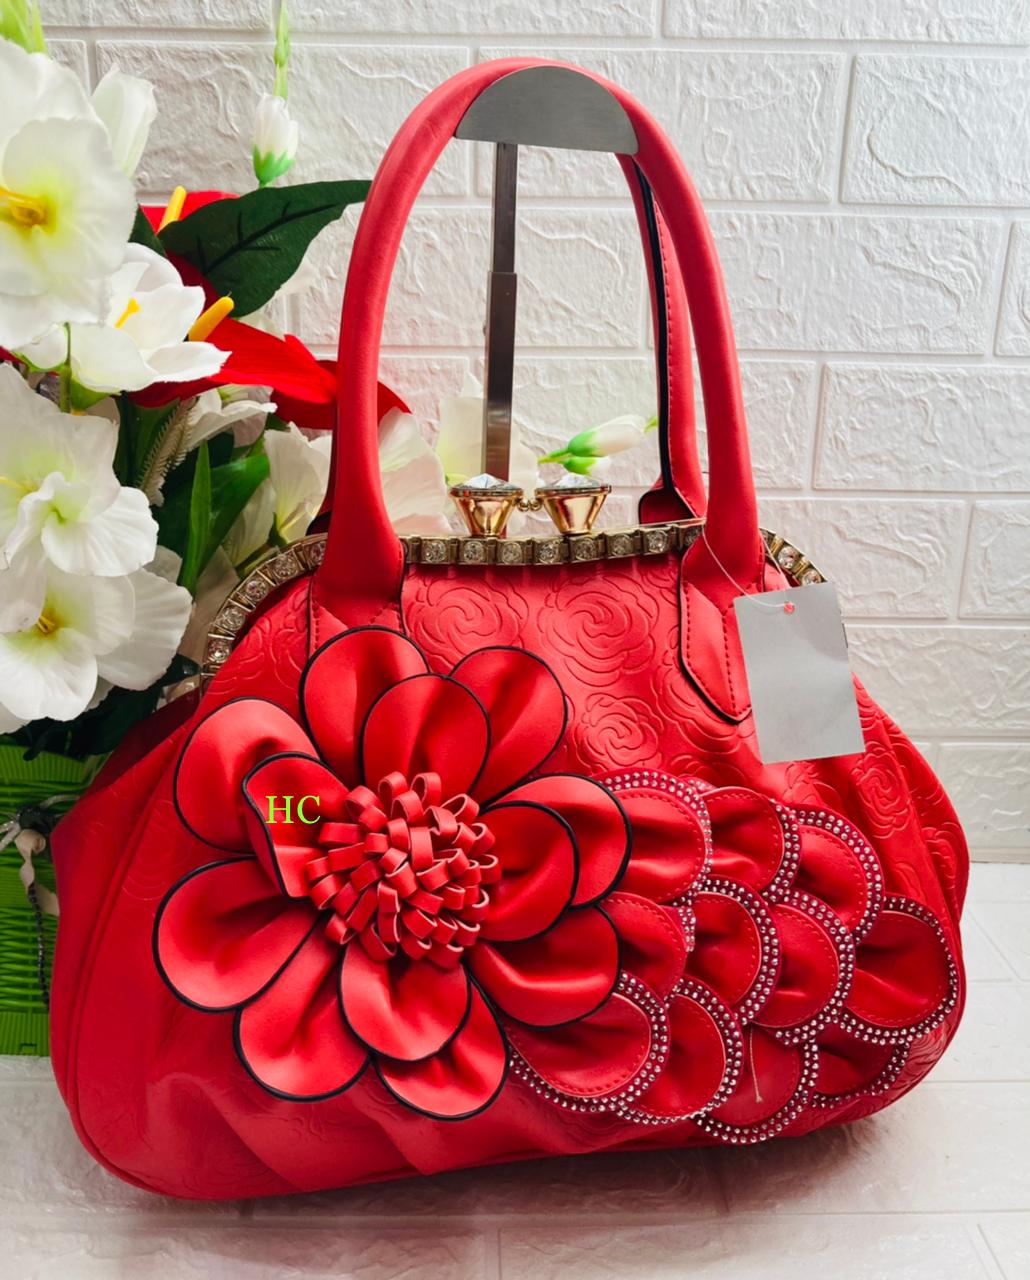 What do you need to start a Designer Handbag Business in India